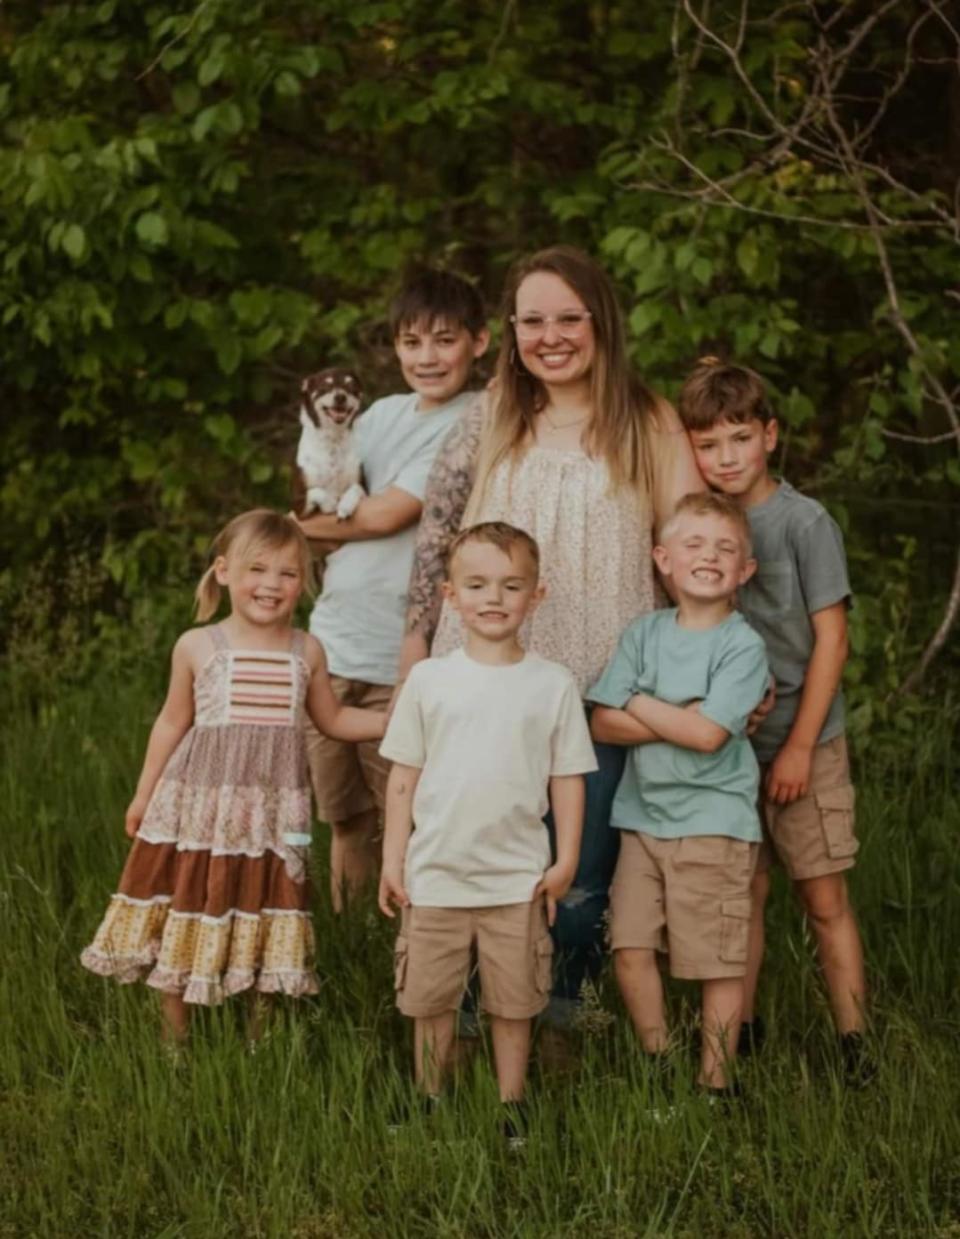 Aubren Dudley, a mother from Rogersville, was killed in a crash Wednesday afternoon. She spent her career working with children who had difficult life circumstances.